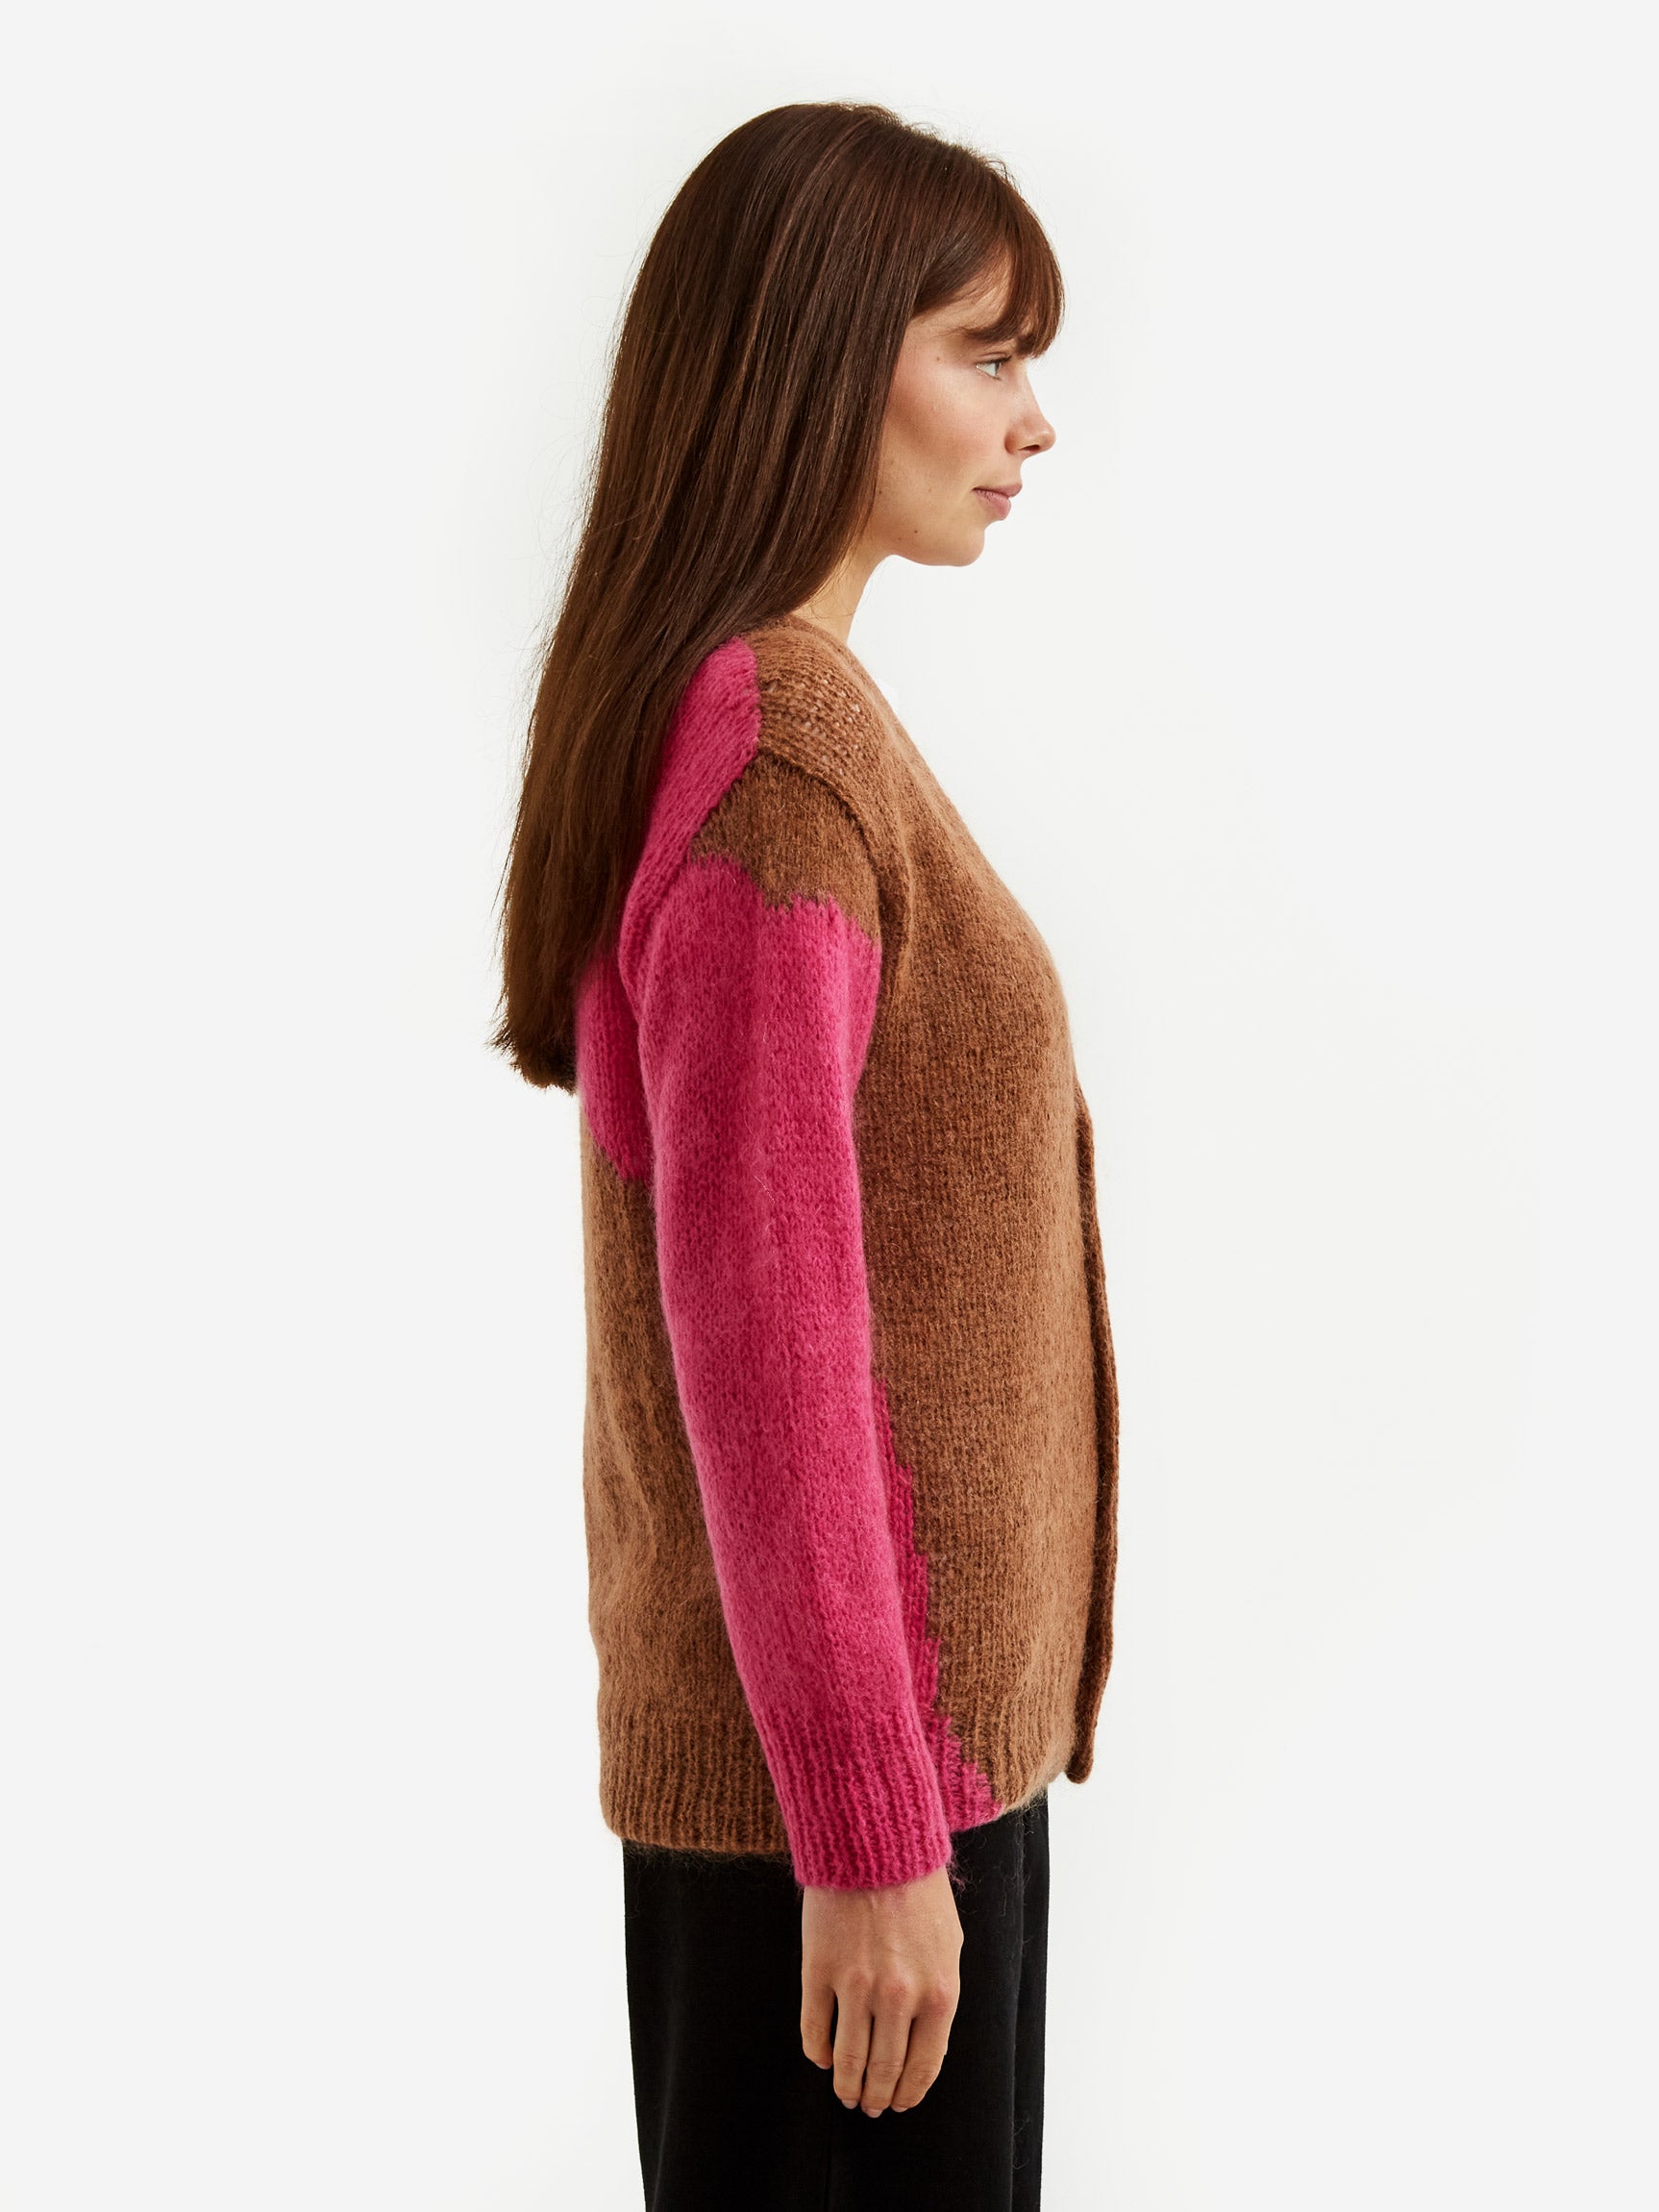 NOMA t.d. Hand Knitted Mohair Cardigan - Brown/Pink